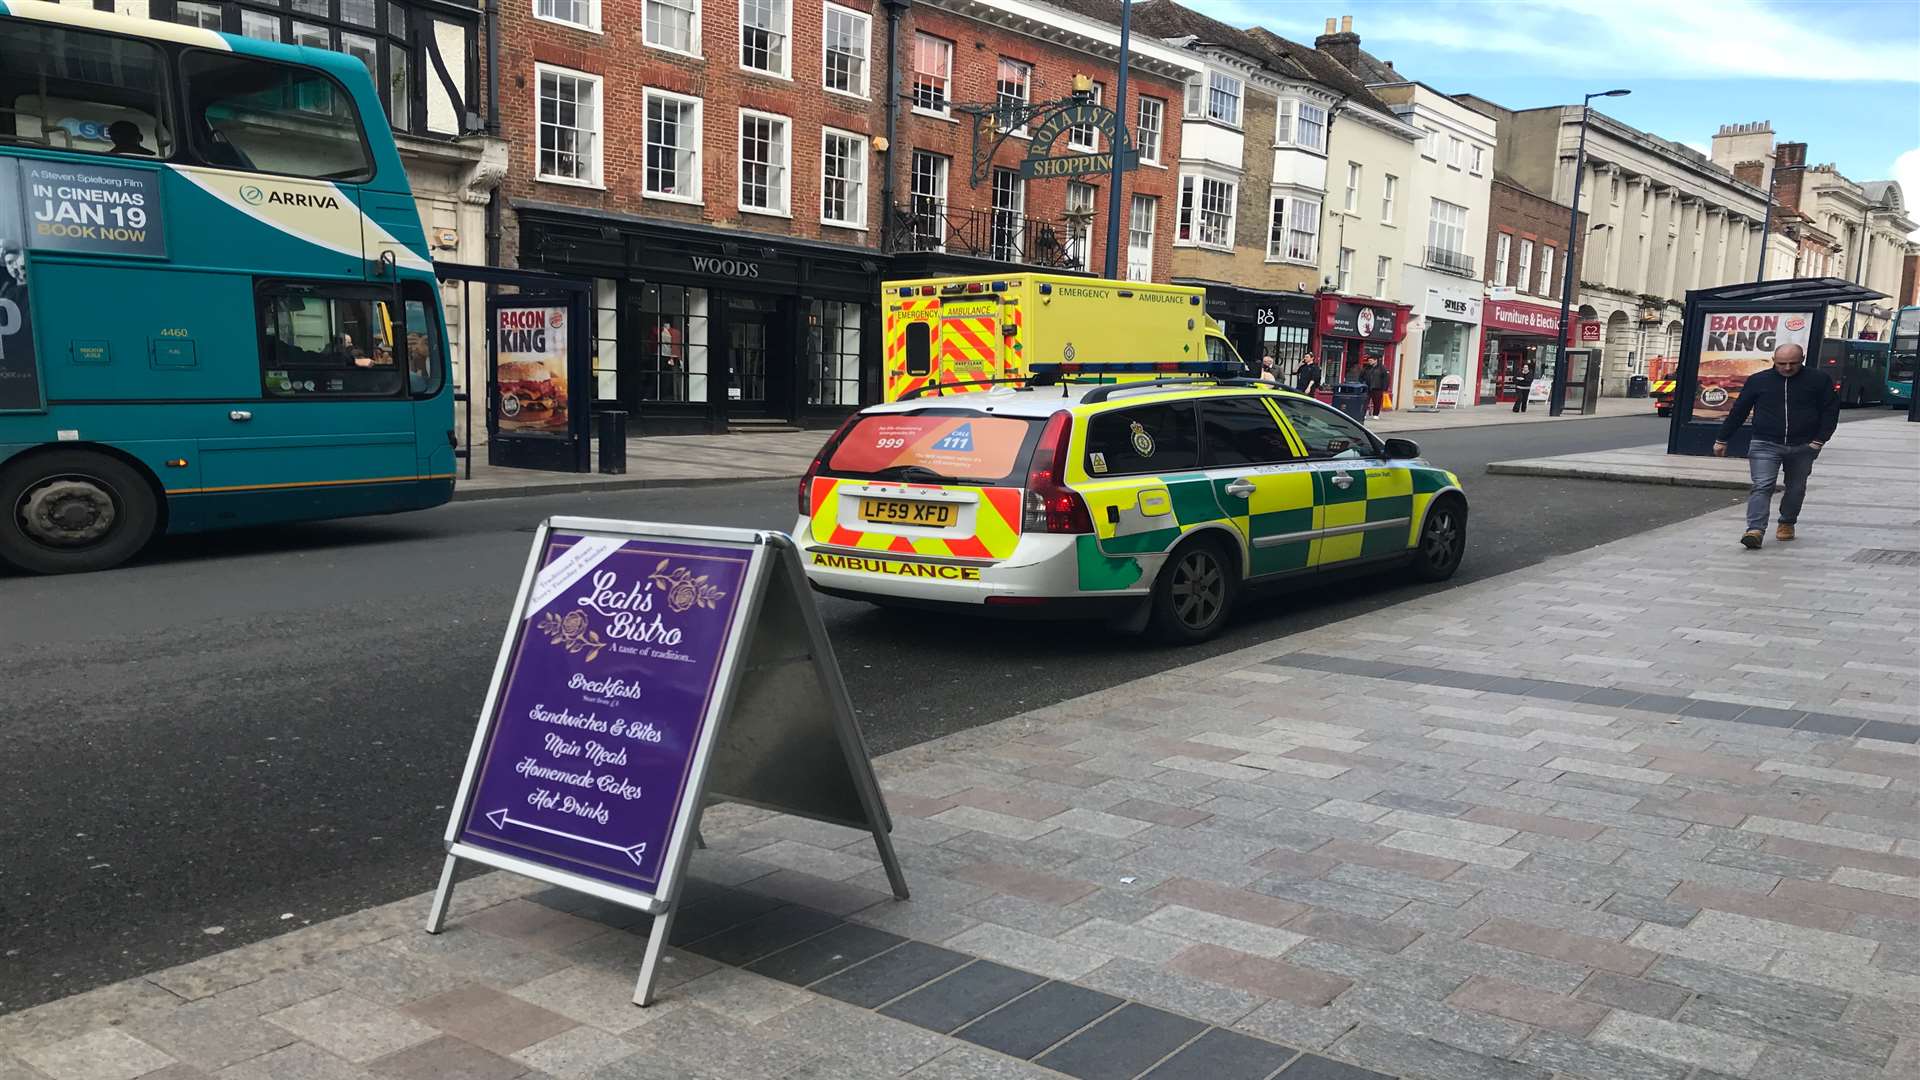 Paramedics have been called to Maidstone High Street.